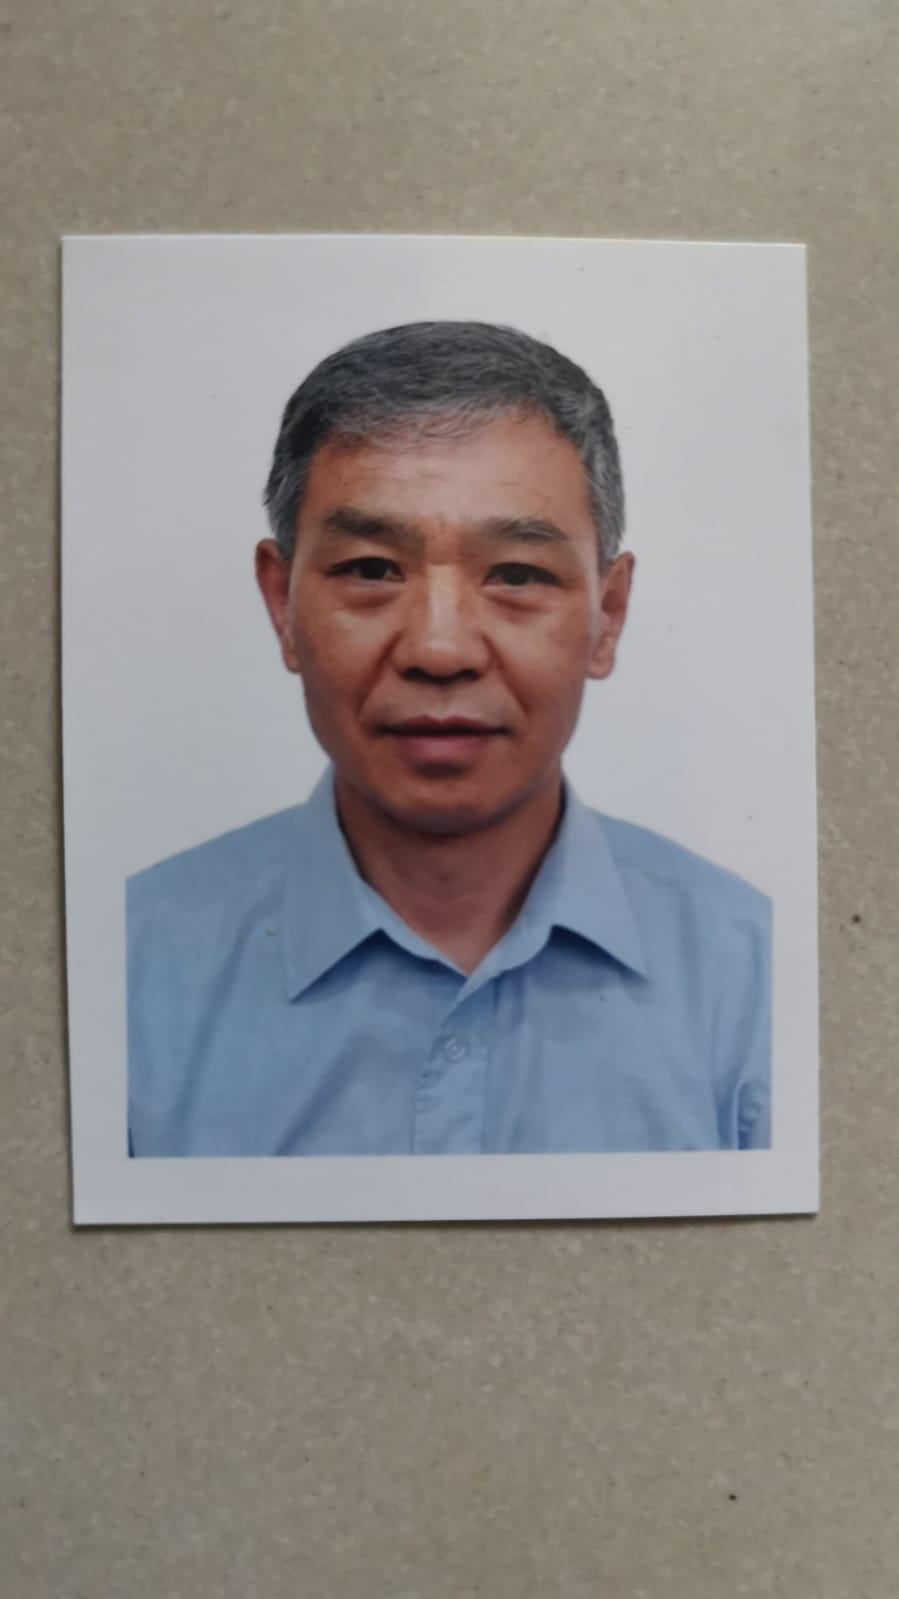 Yau Chun, aged 71, is about 1.7 metres tall, 65 kilograms in weight and of thin build. He has a round face with yellow complexion and short grey hair. He was last seen wearing a light blue long-sleeved shirt, grey trousers and dark-coloured shoes.